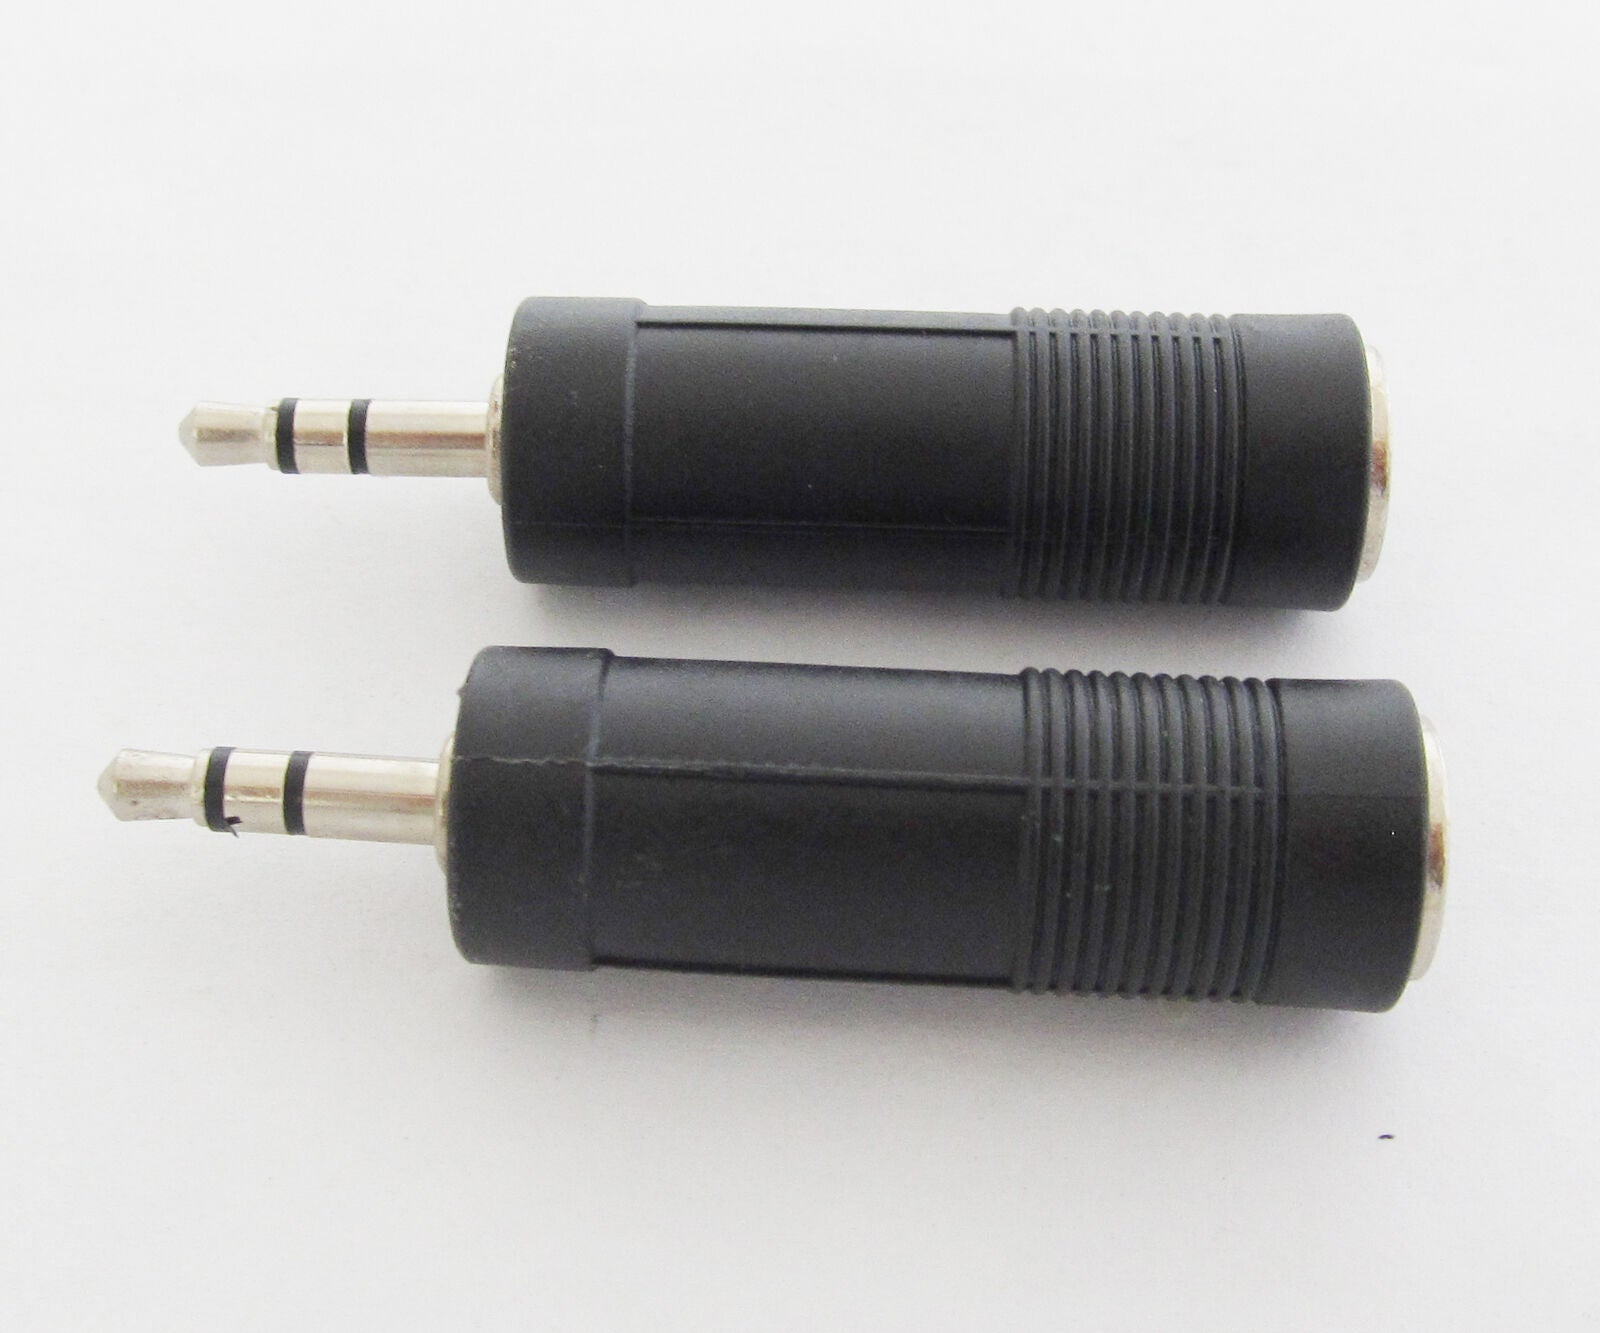 1pc 1/8" 3.5mm Stereo Male to 1/4" 6.35mm Stereo Female Audio Adapter Converter